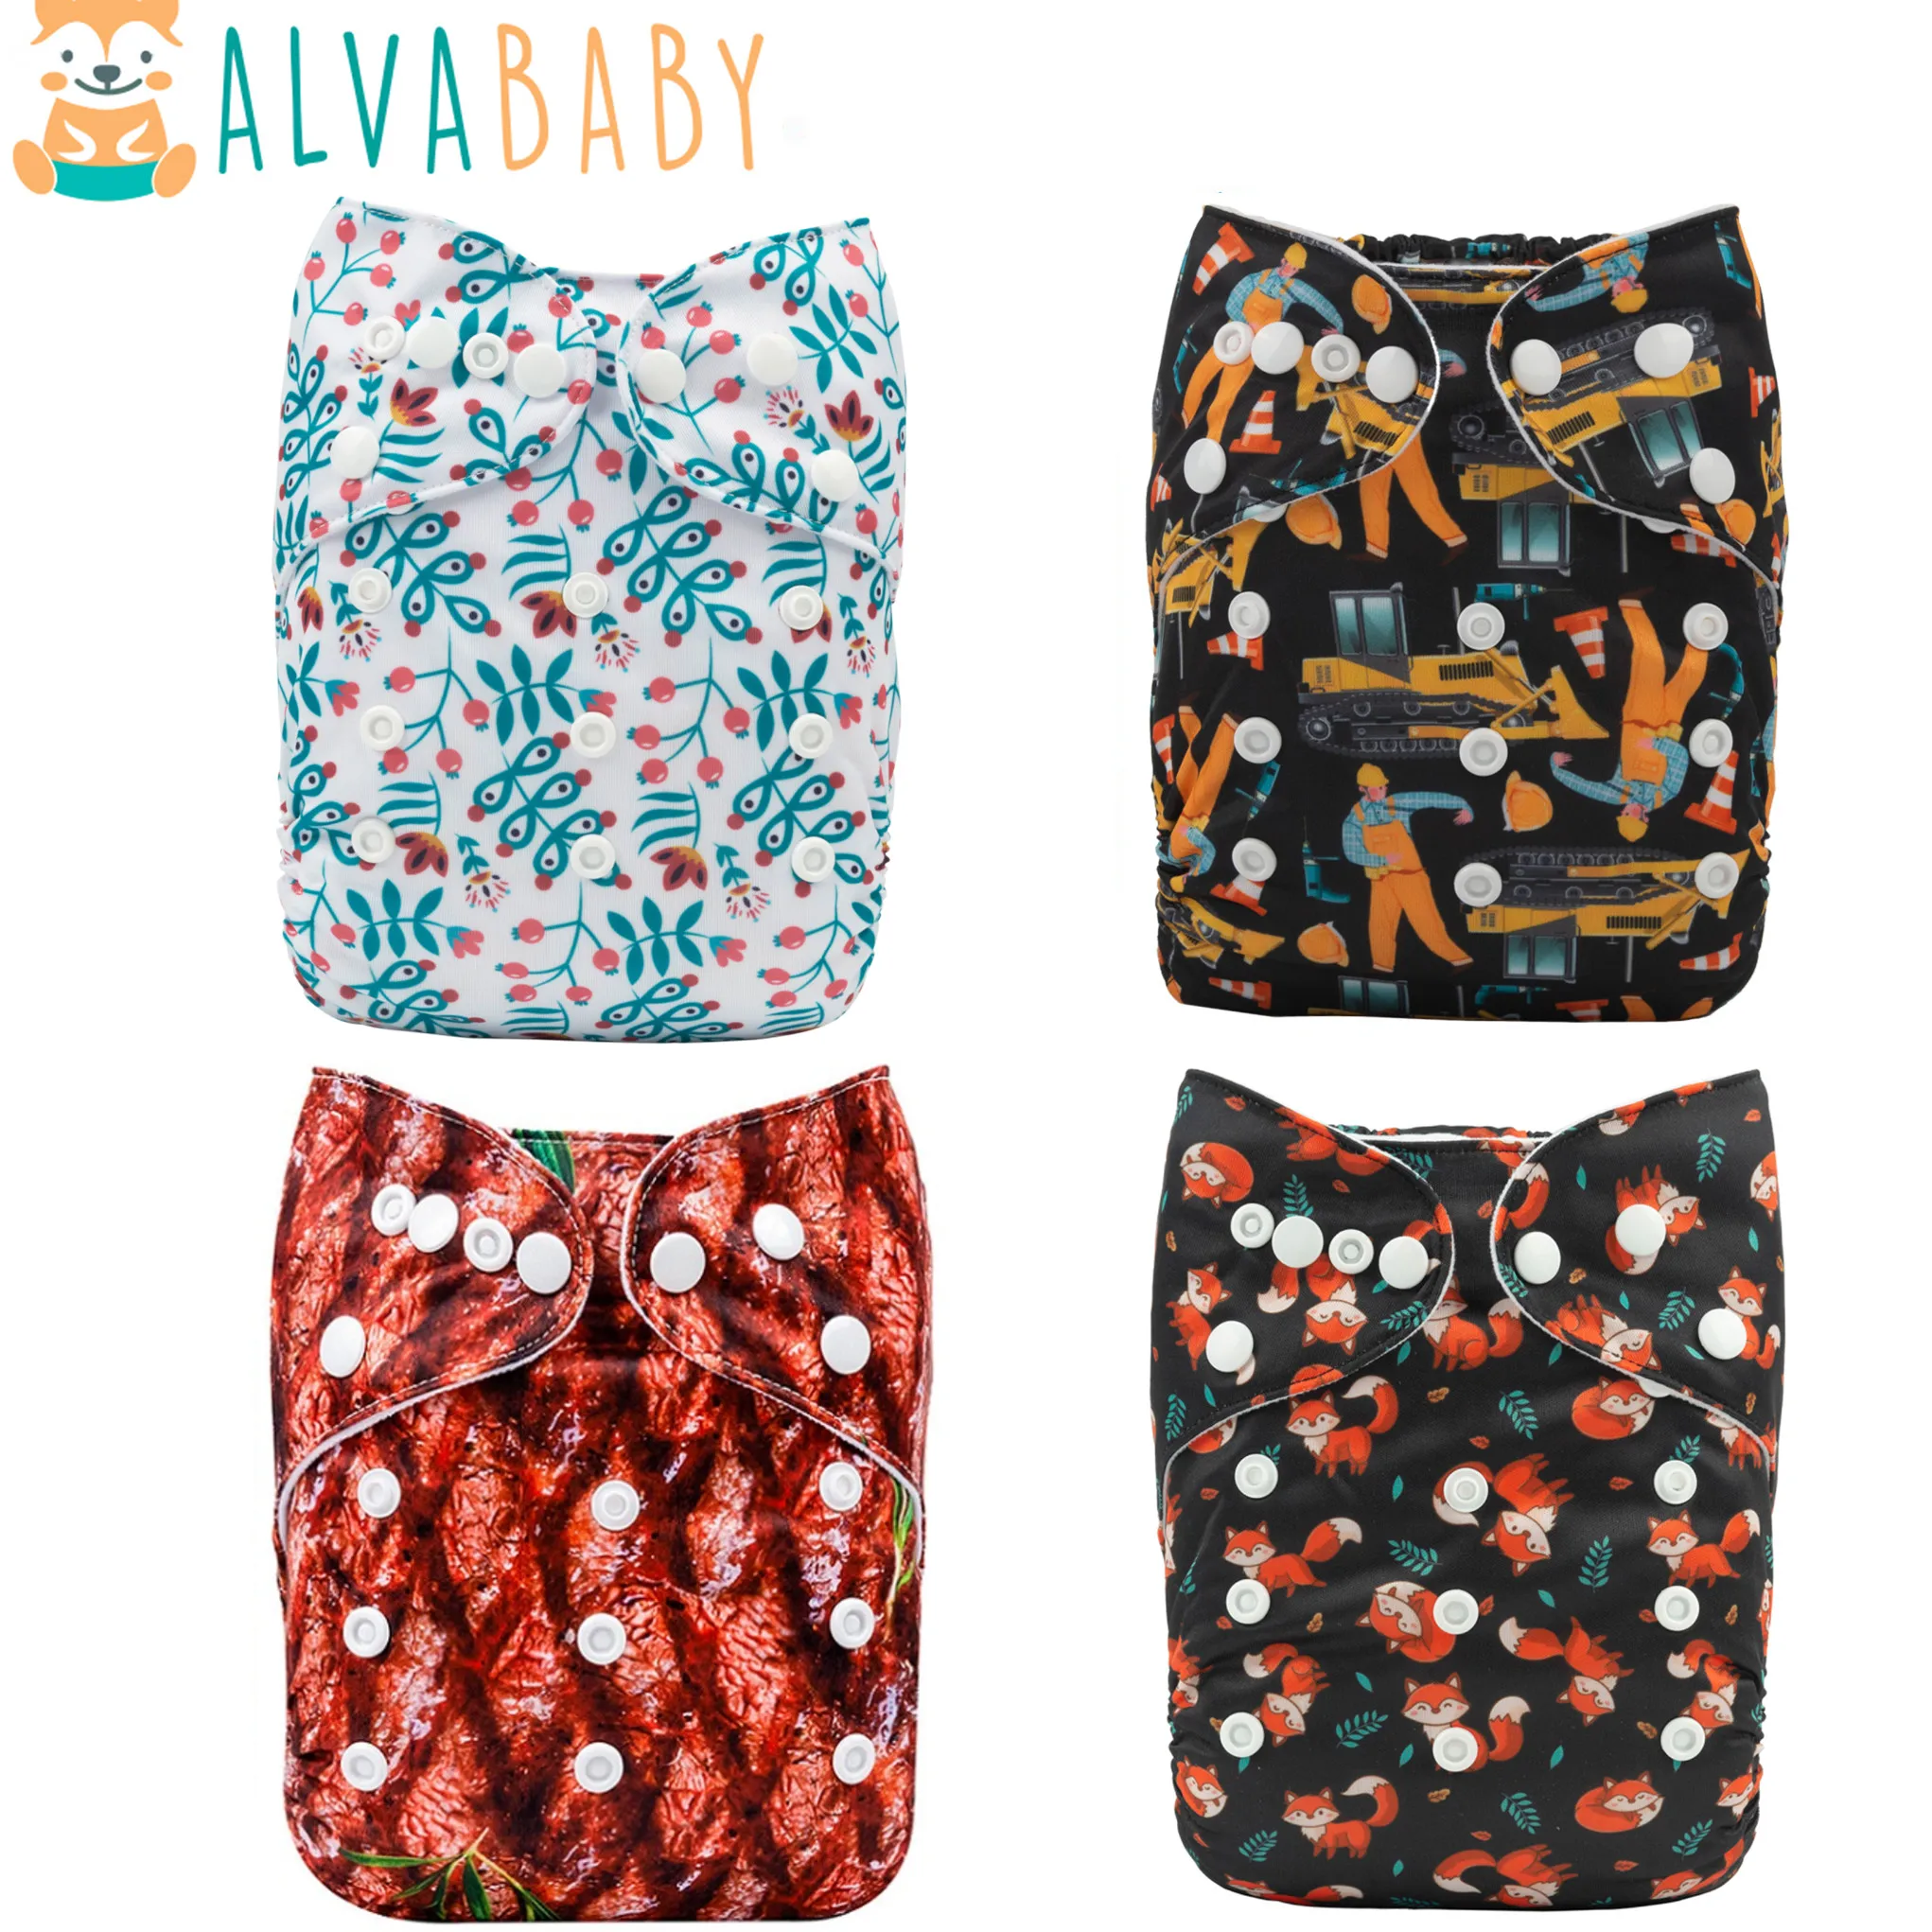 Insert U Pick ALVABABY Cloth Diapers One Size Reusable Washable Pocket Nappy 